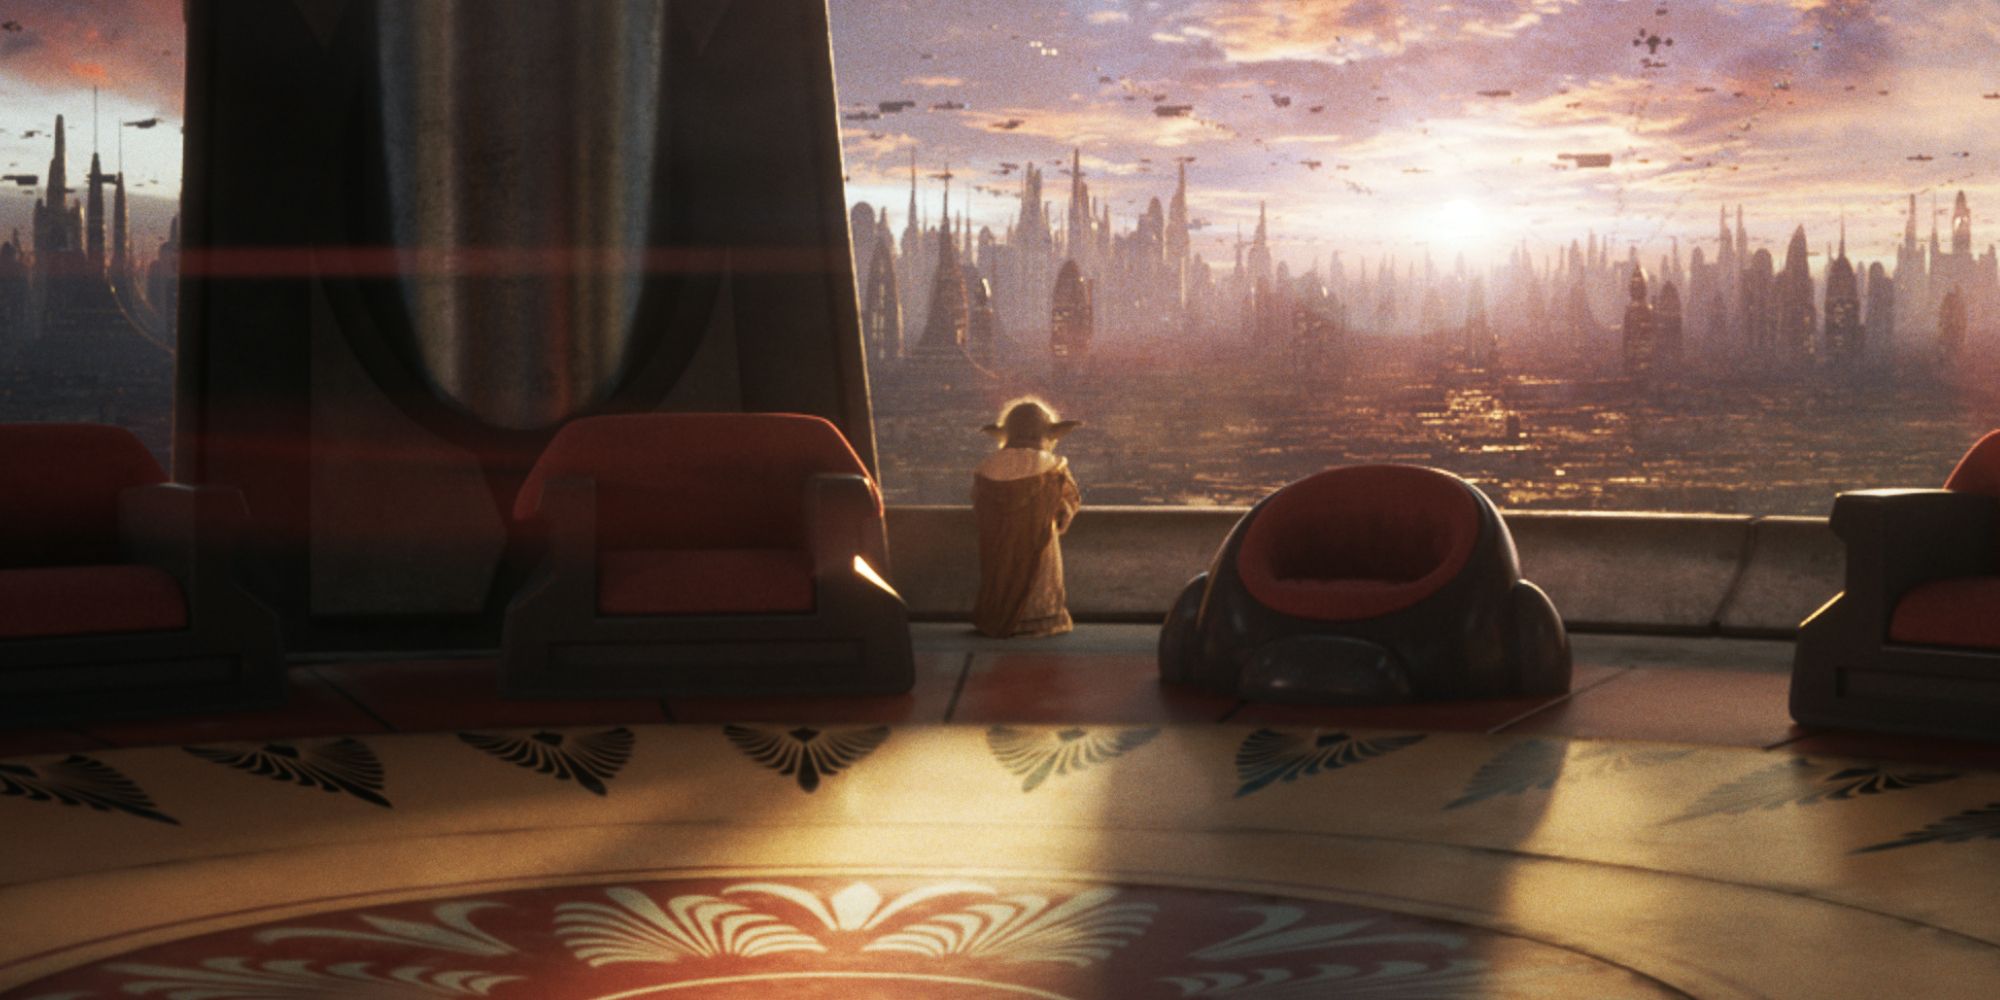 Yoda Stares Out at Coruscant from the Jedi Council chamber in Star Wars Eclipse trailer